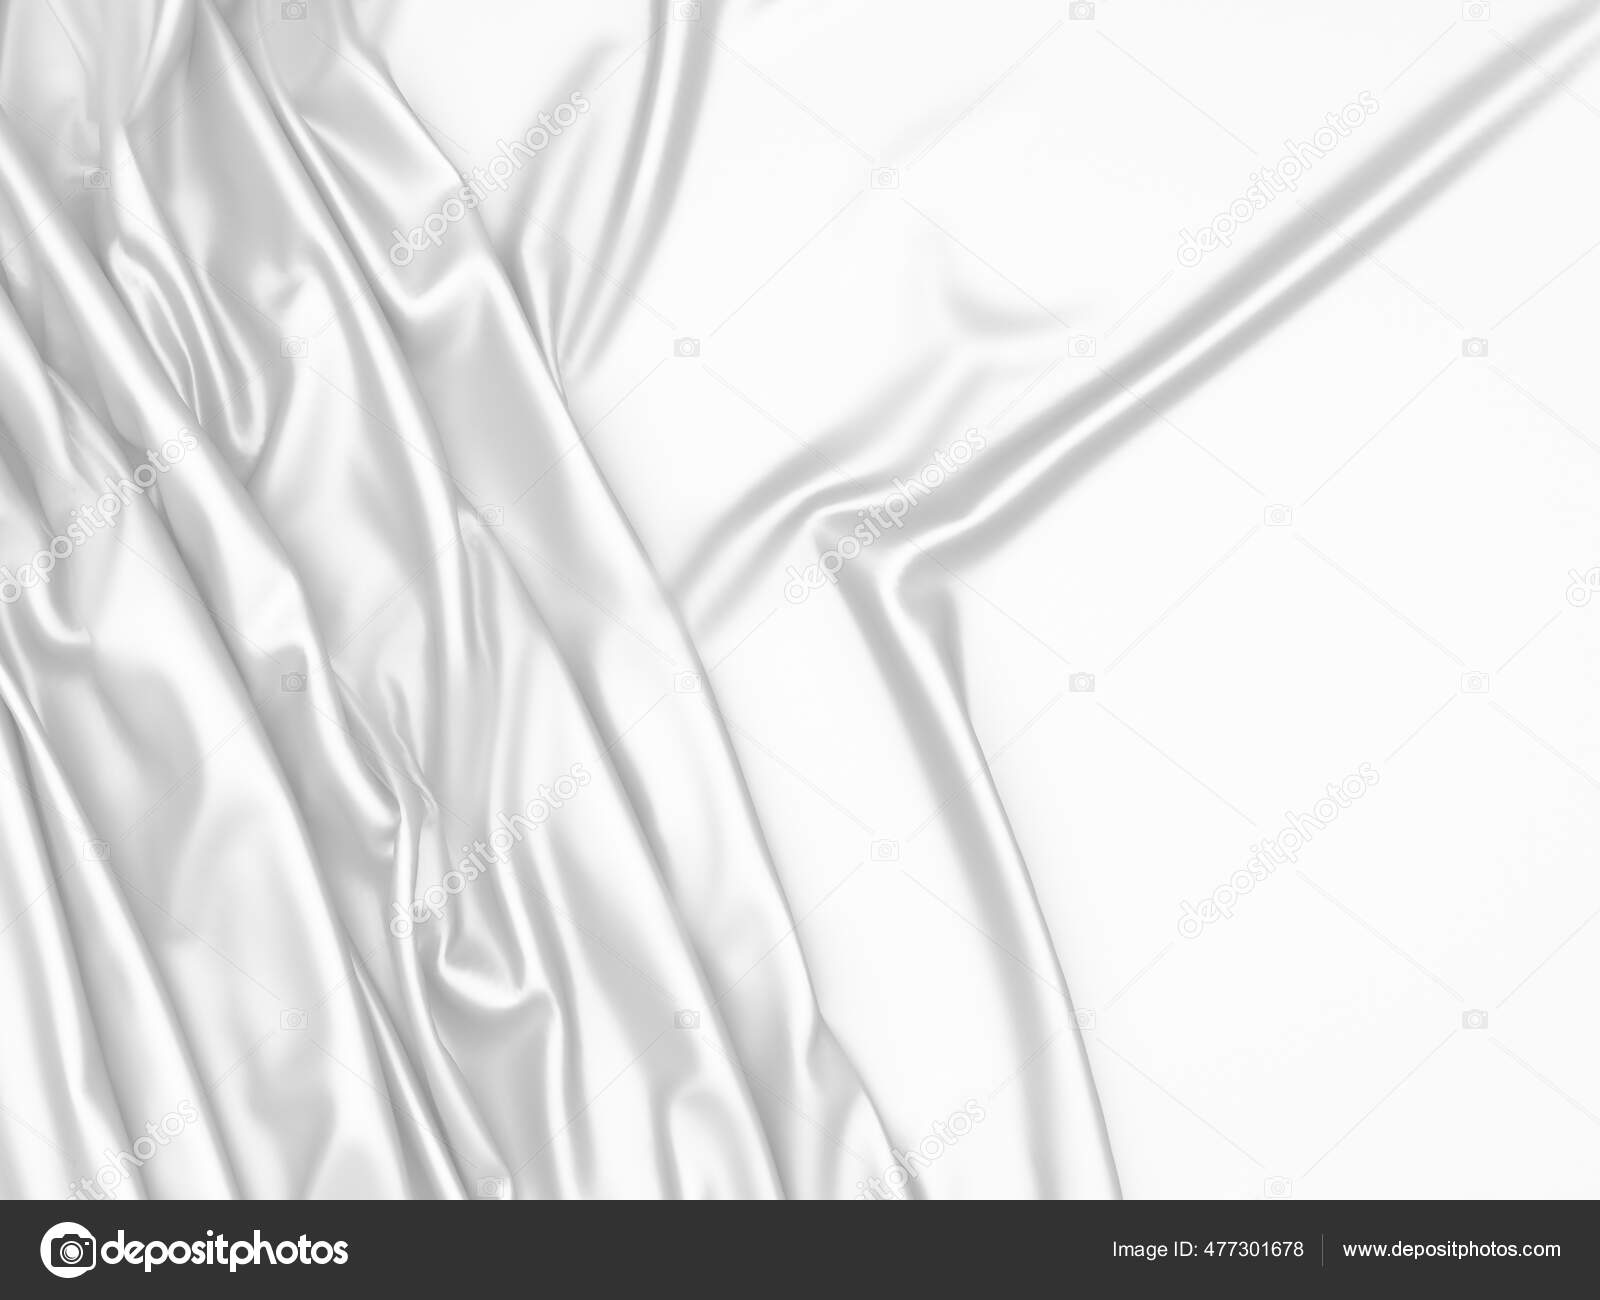 Silver white shiny material with folds in draped silk or satin material  design, luxury white background in wavy rippled cloth with smooth metallic  fabric texture Stock Illustration